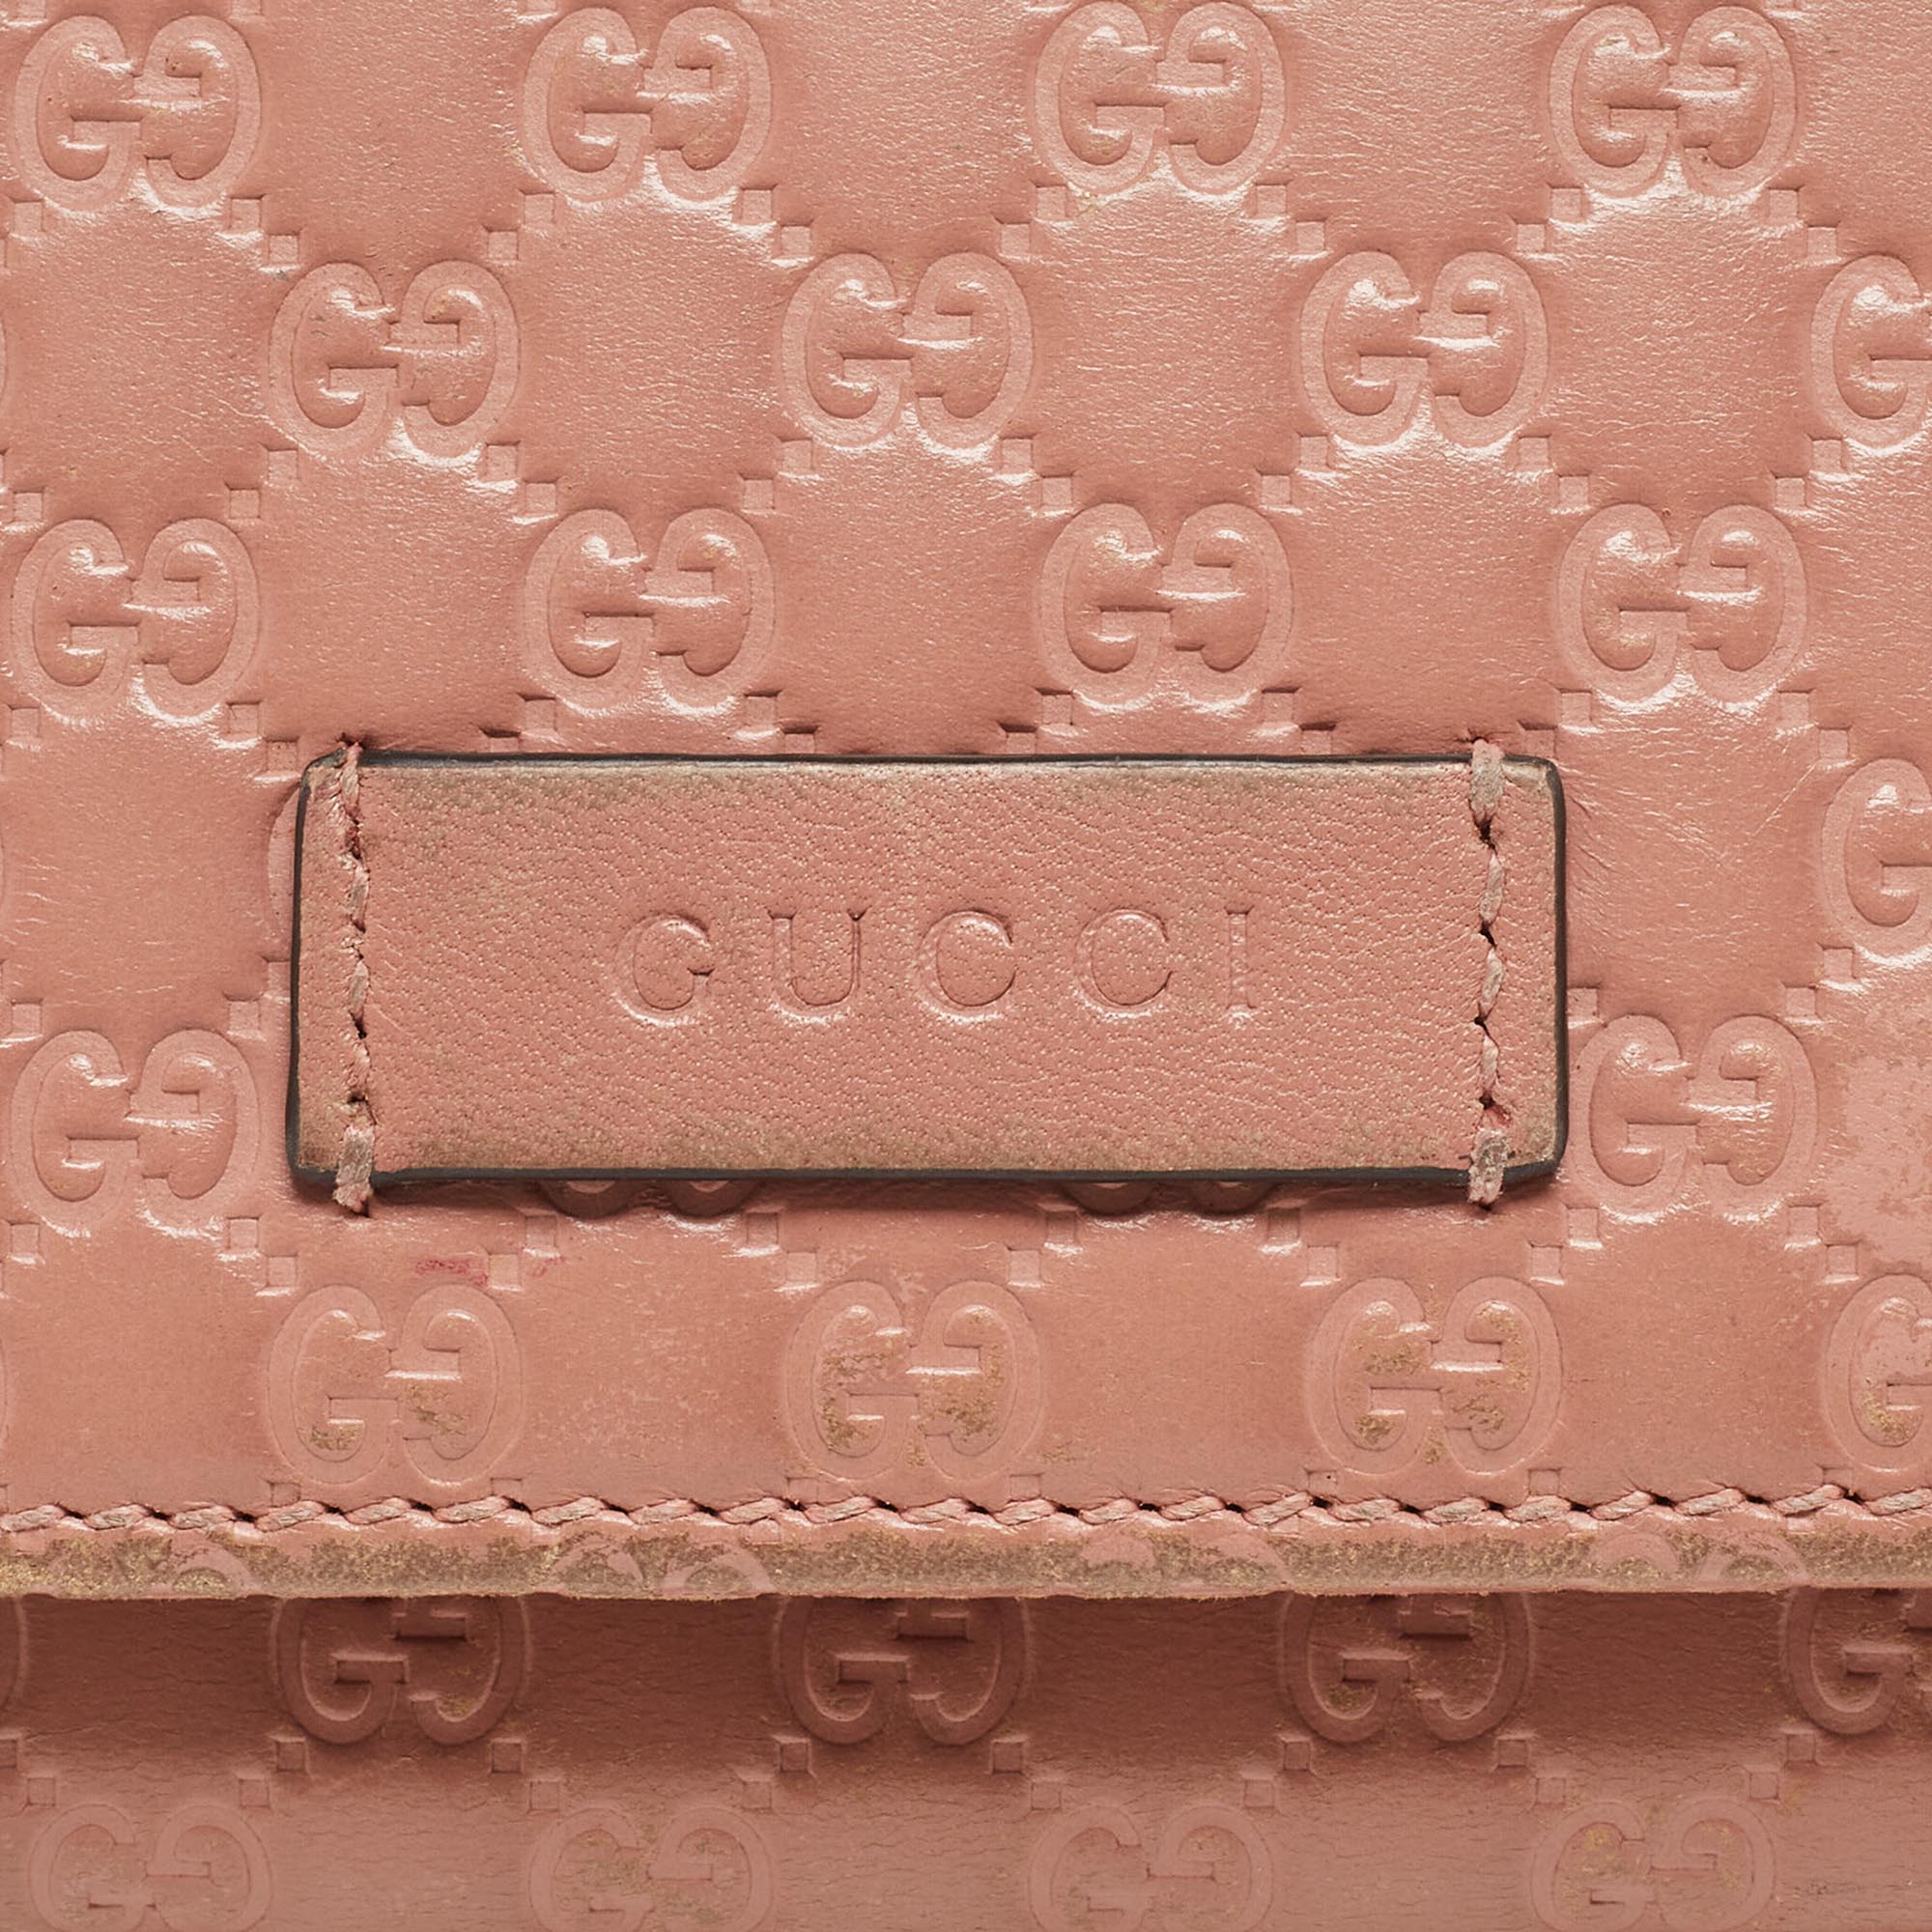 Gucci Pink Microgucissima Leather Flap Continental Wallet